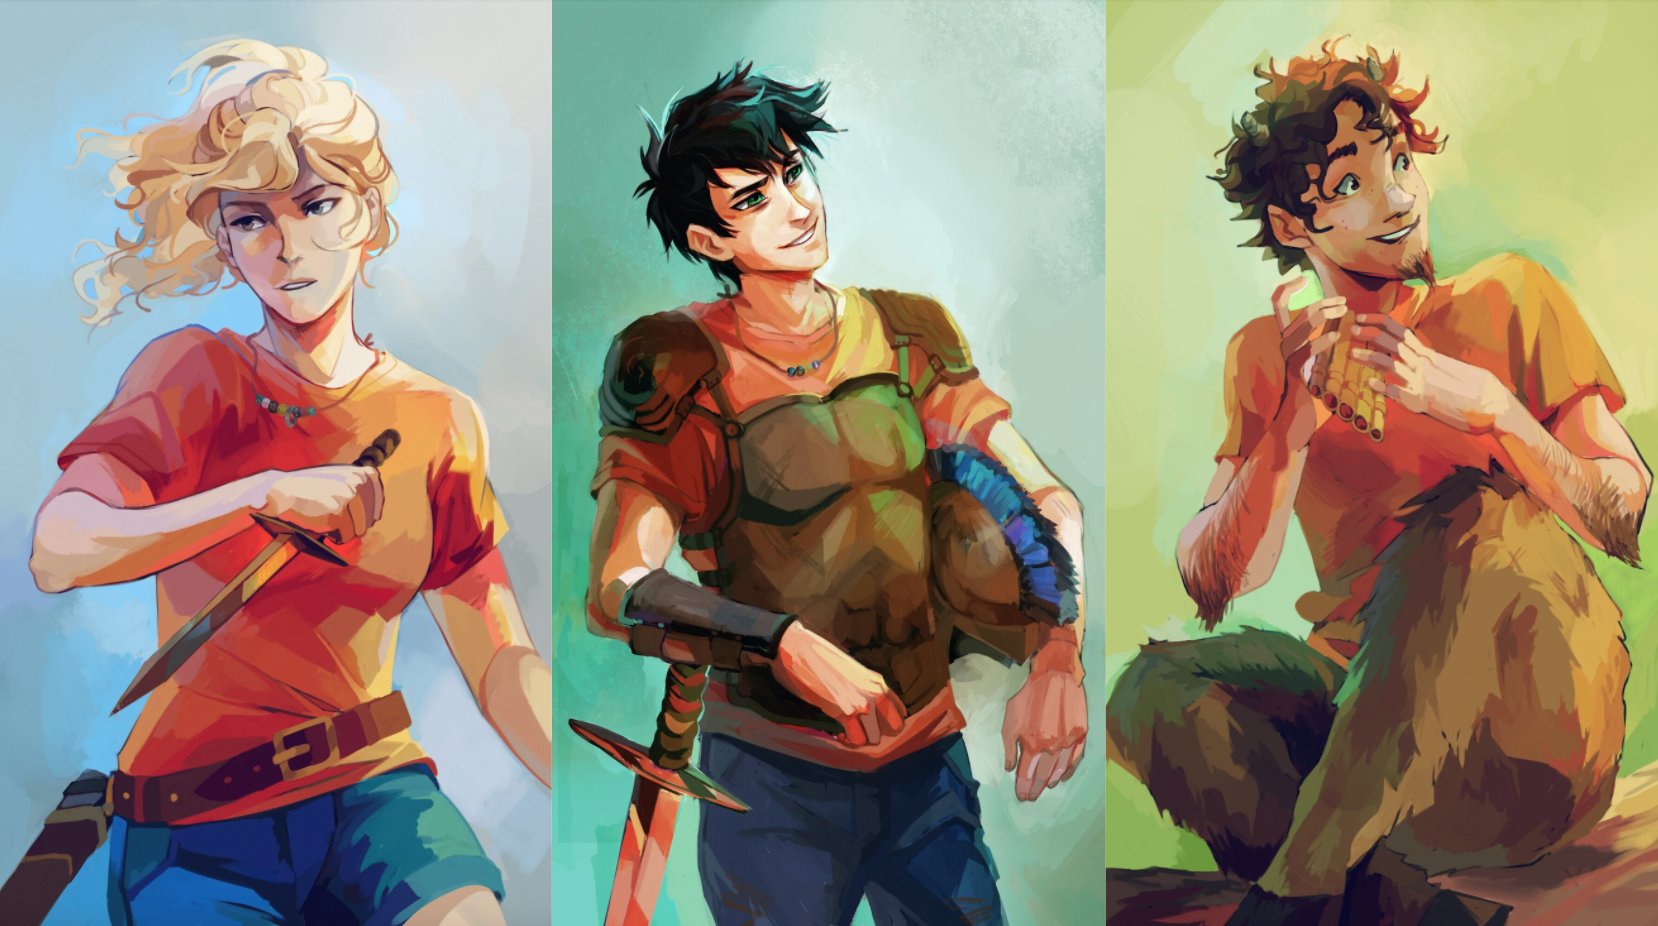 An image of Annabeth Chase, Percy Jackson, and Grover Underwood from the book series Percy Jackson.